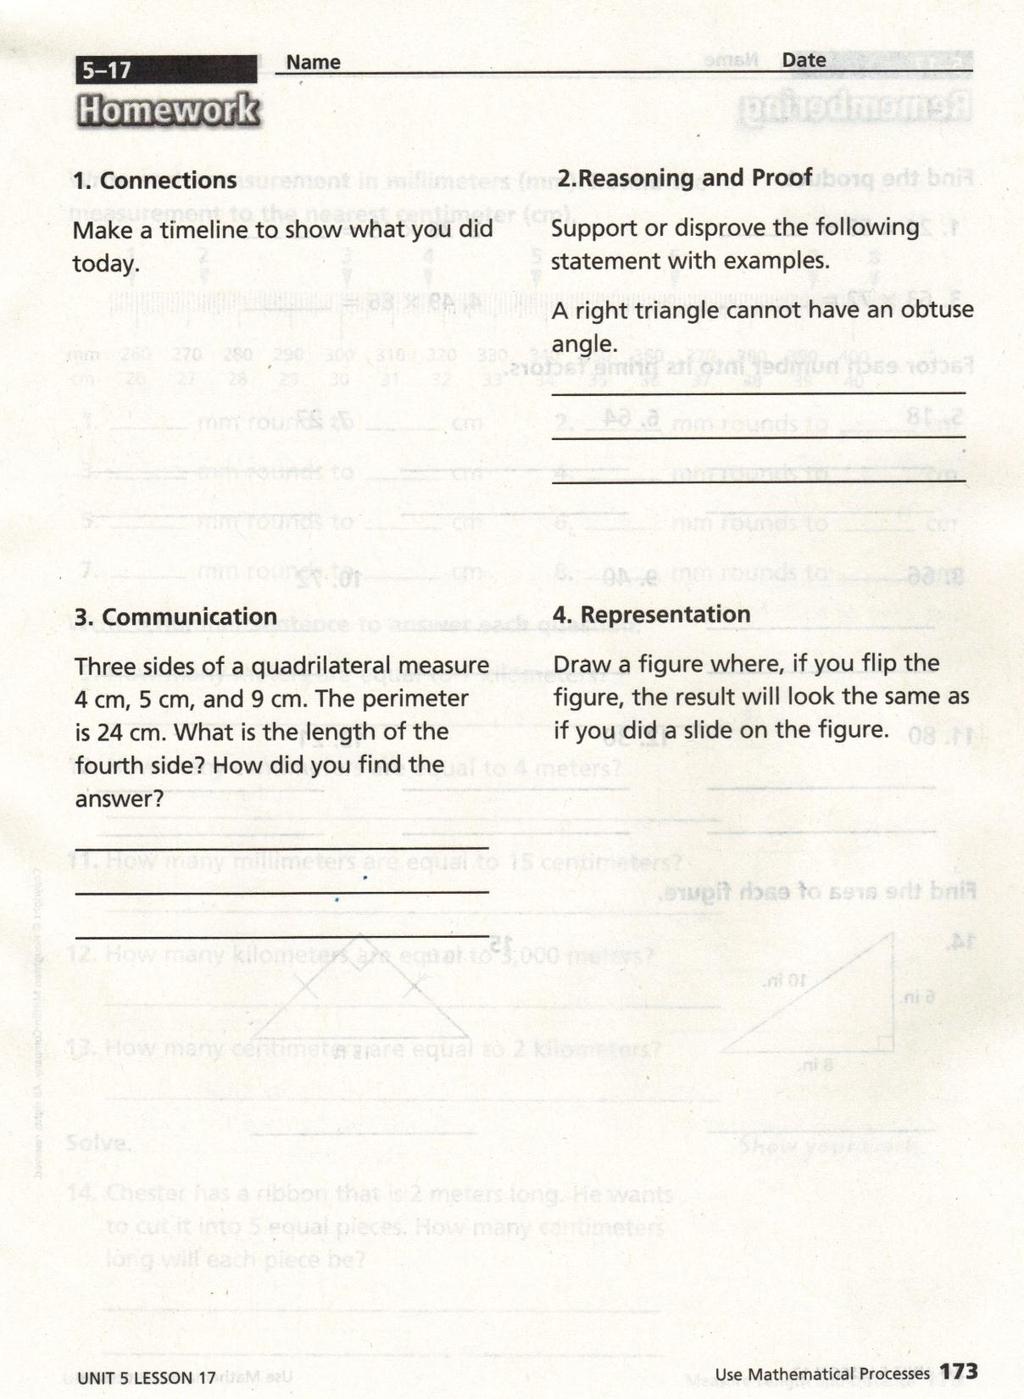 4 th Grade Homework: Another example of the critical